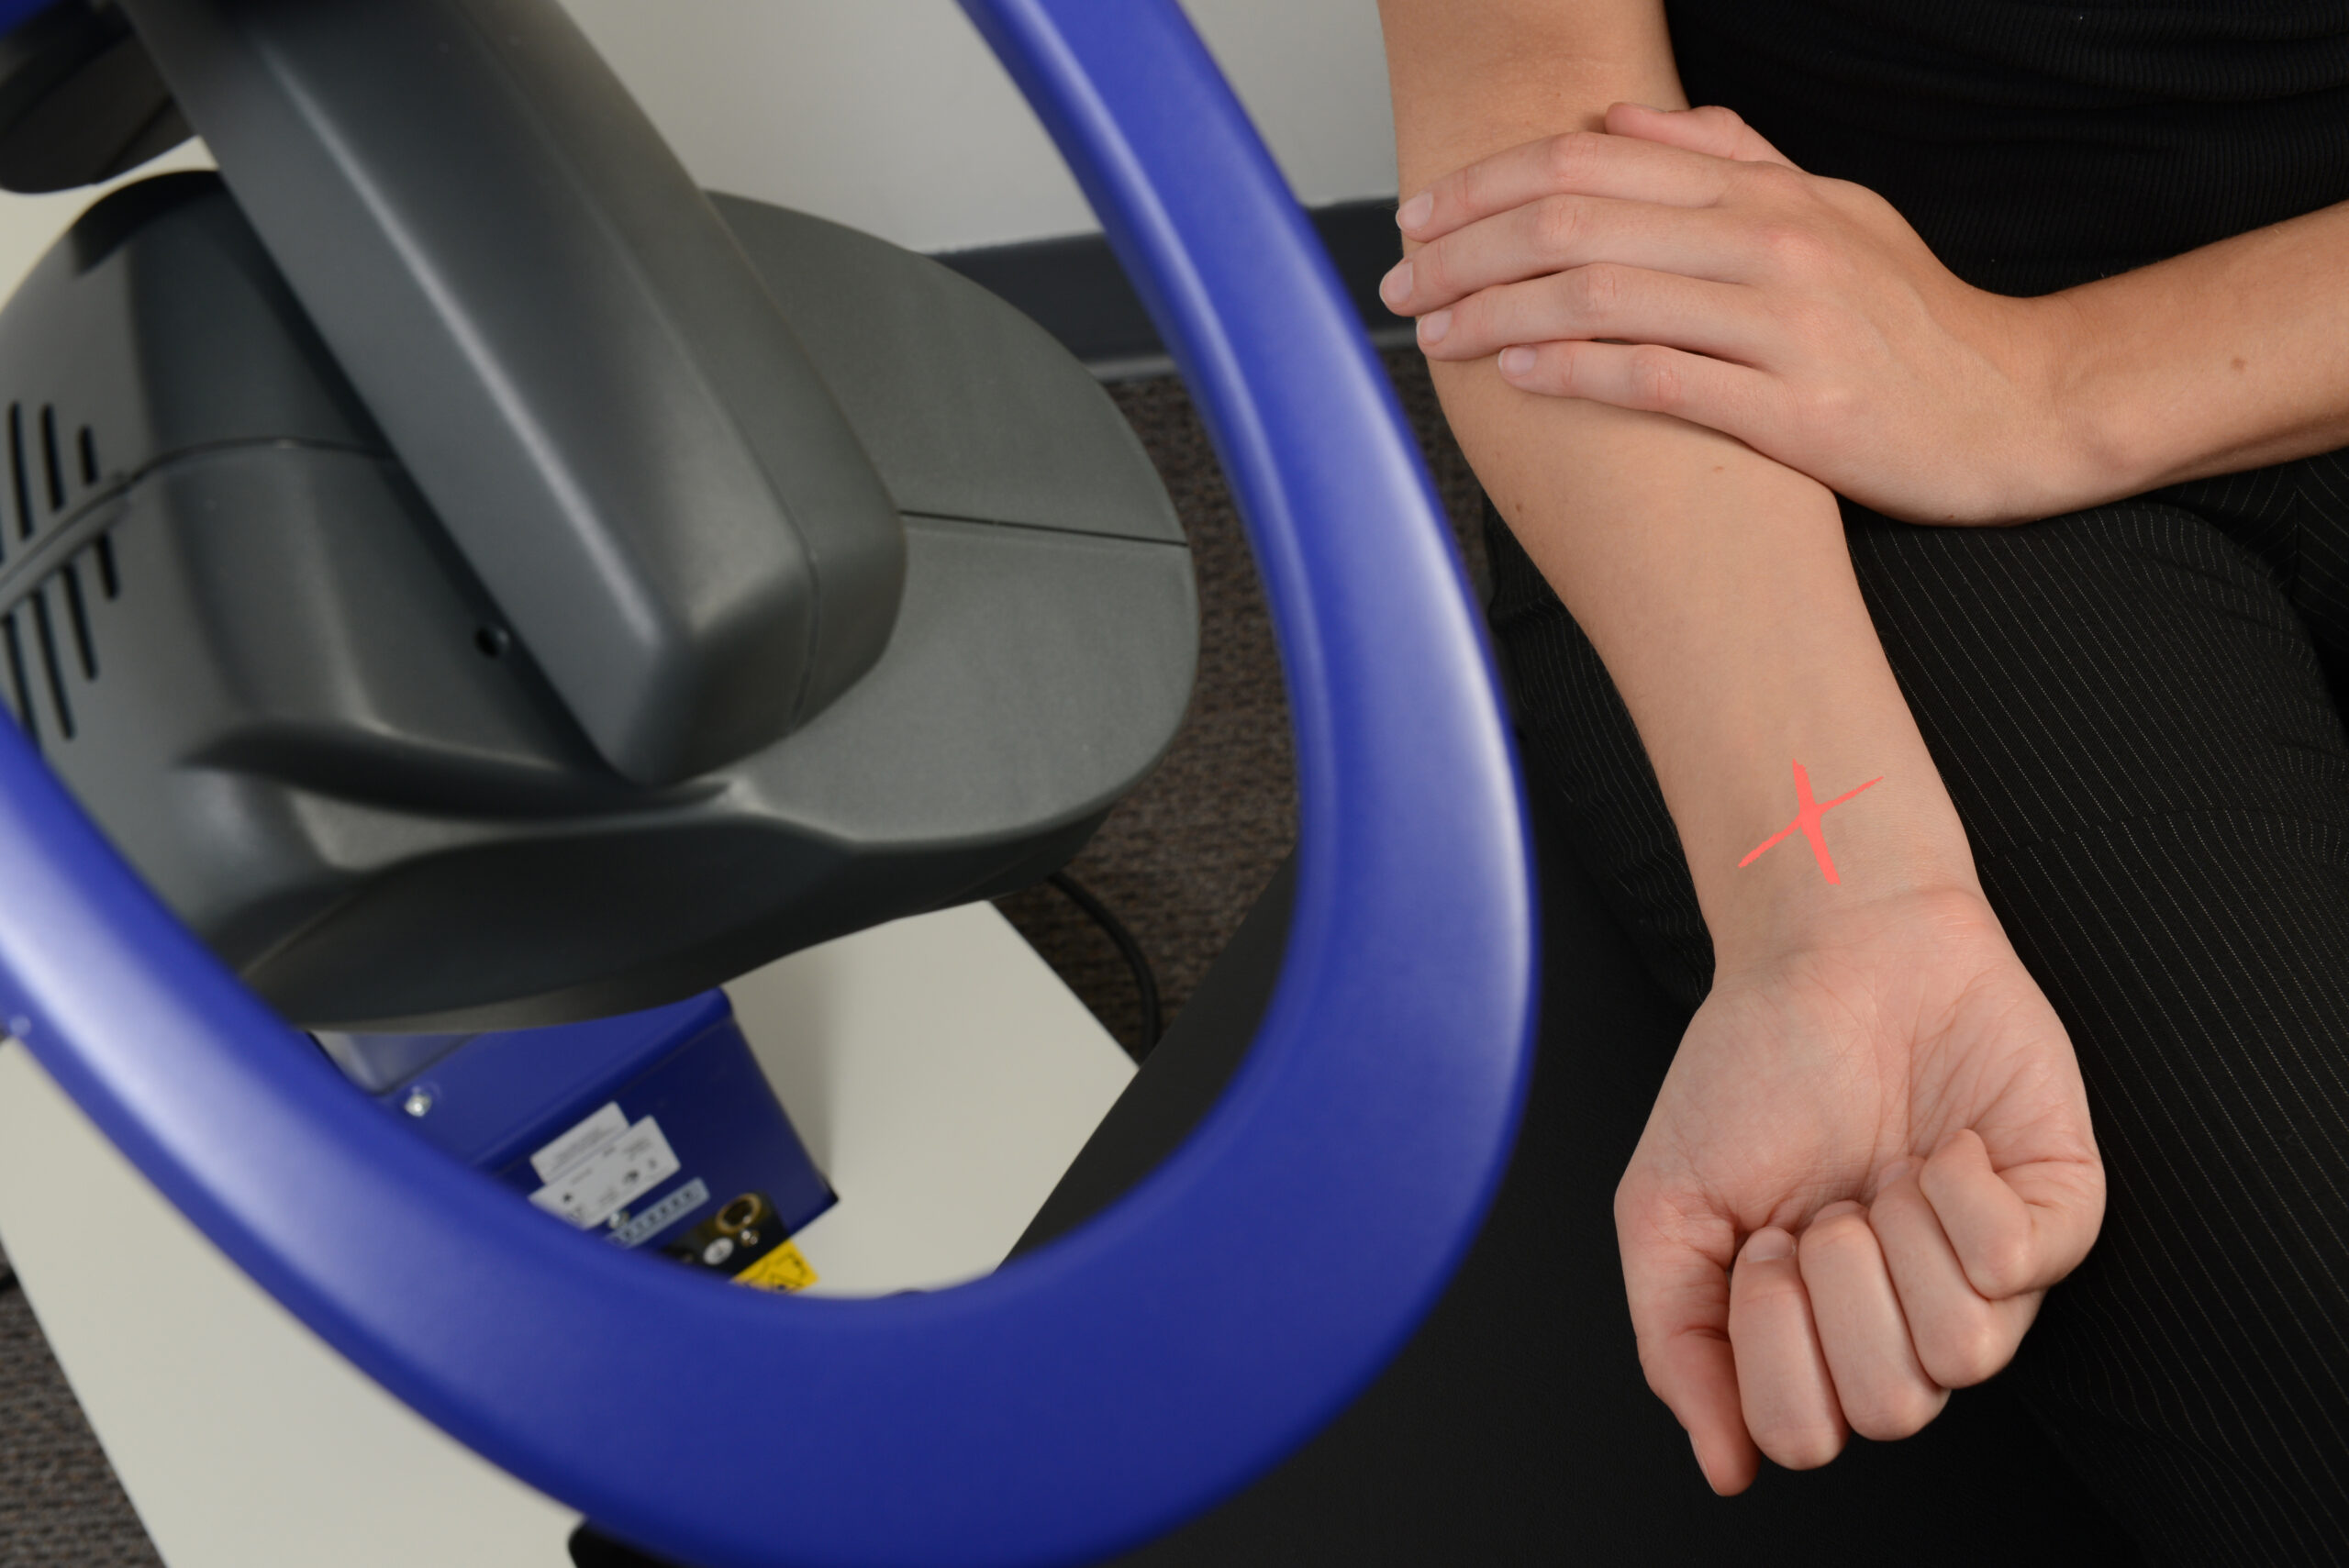 image of a person having laser therapy to their wrist